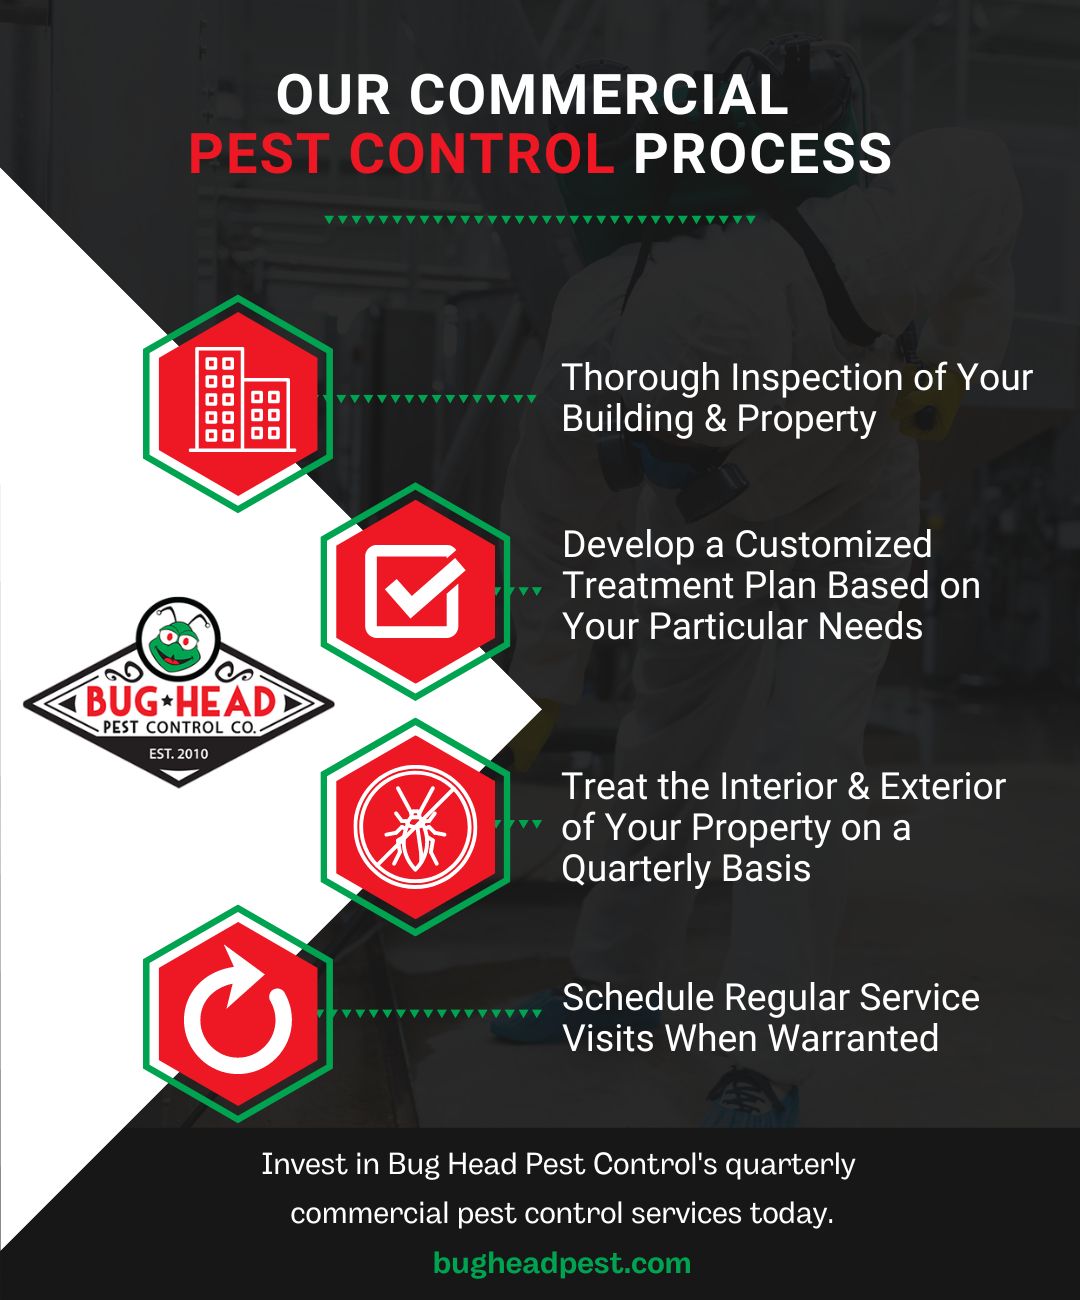 M35984 - Bug Head Pest Control Infographic Commercial Services